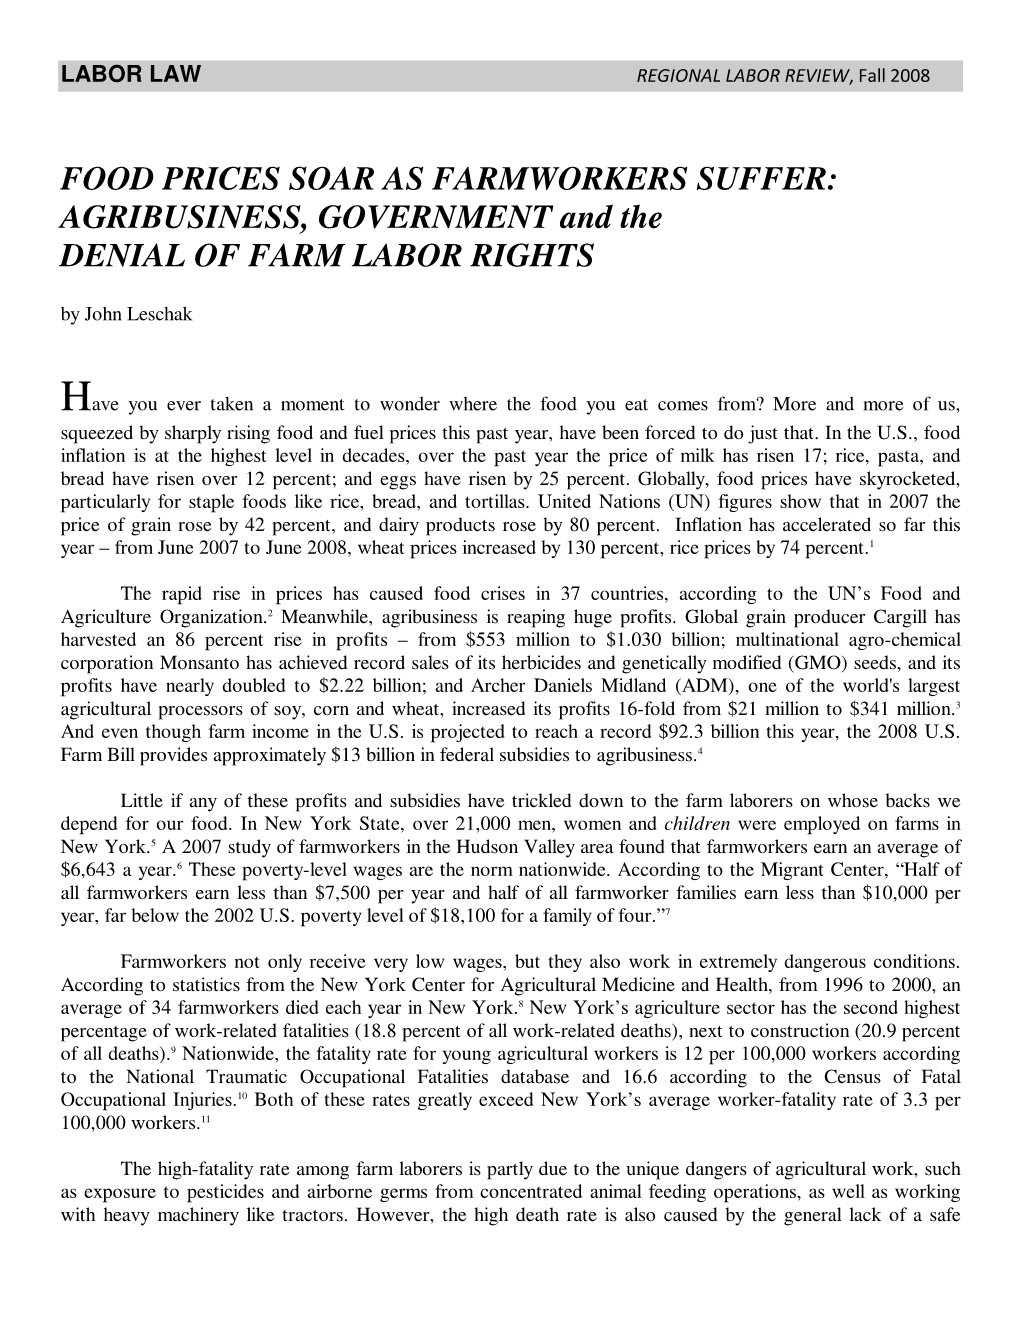 Food Prices Soar As Farmworkers Suffer:Agribusiness, Government